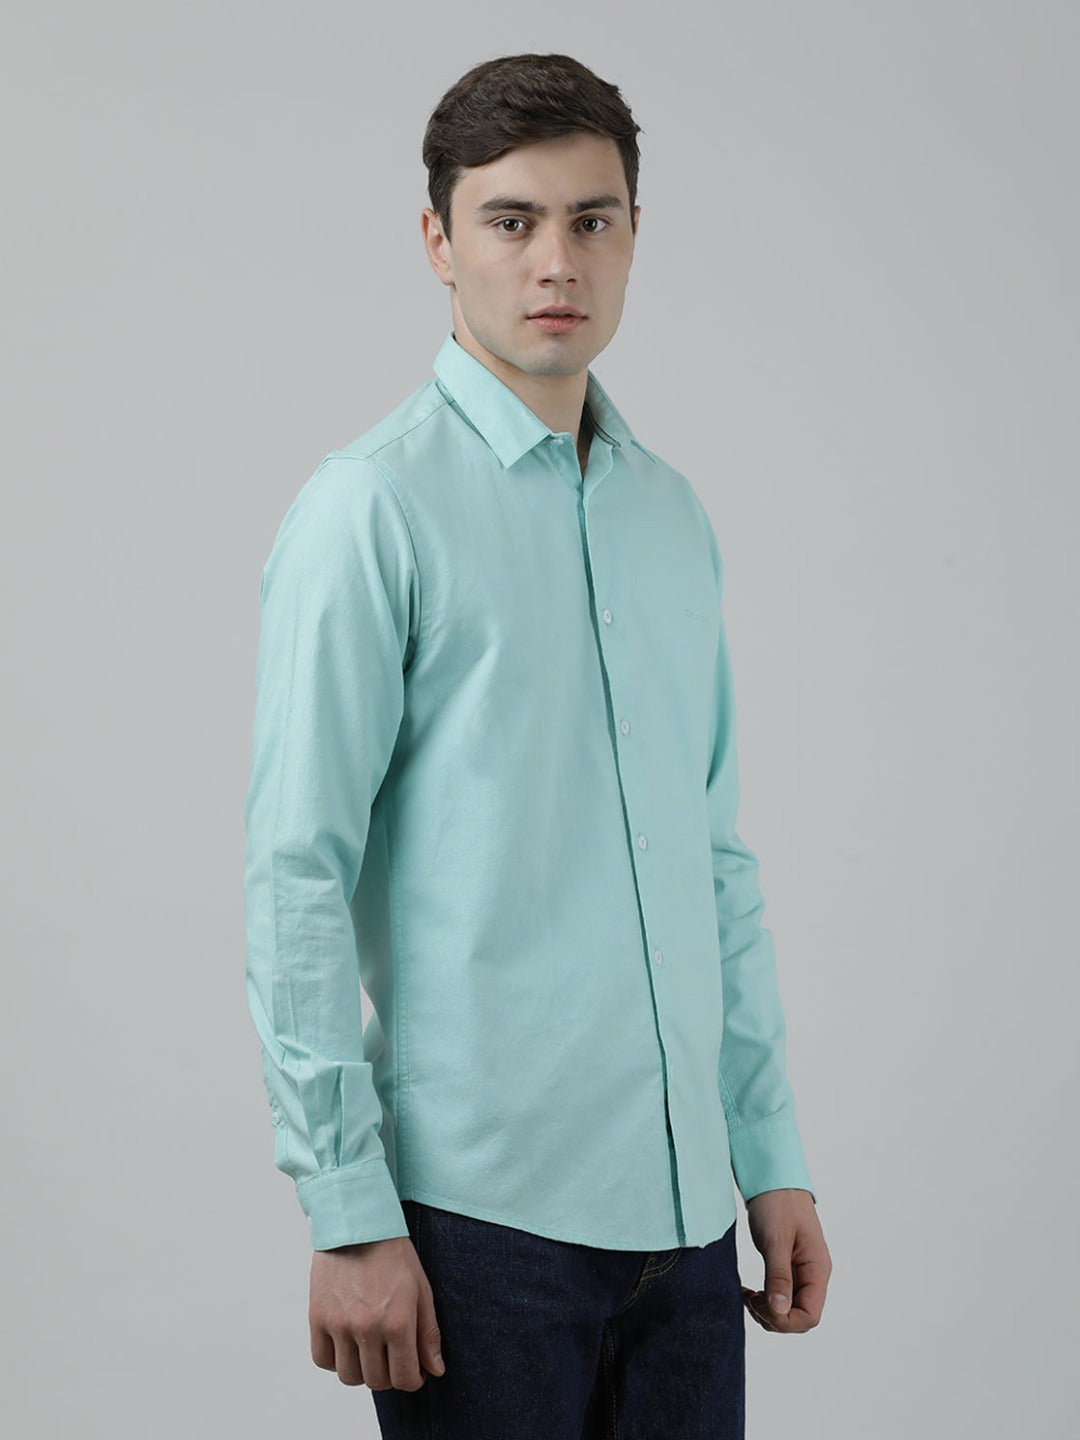 Casual Full Sleeve Slim Fit Printed Shirt Green with Collar for Men